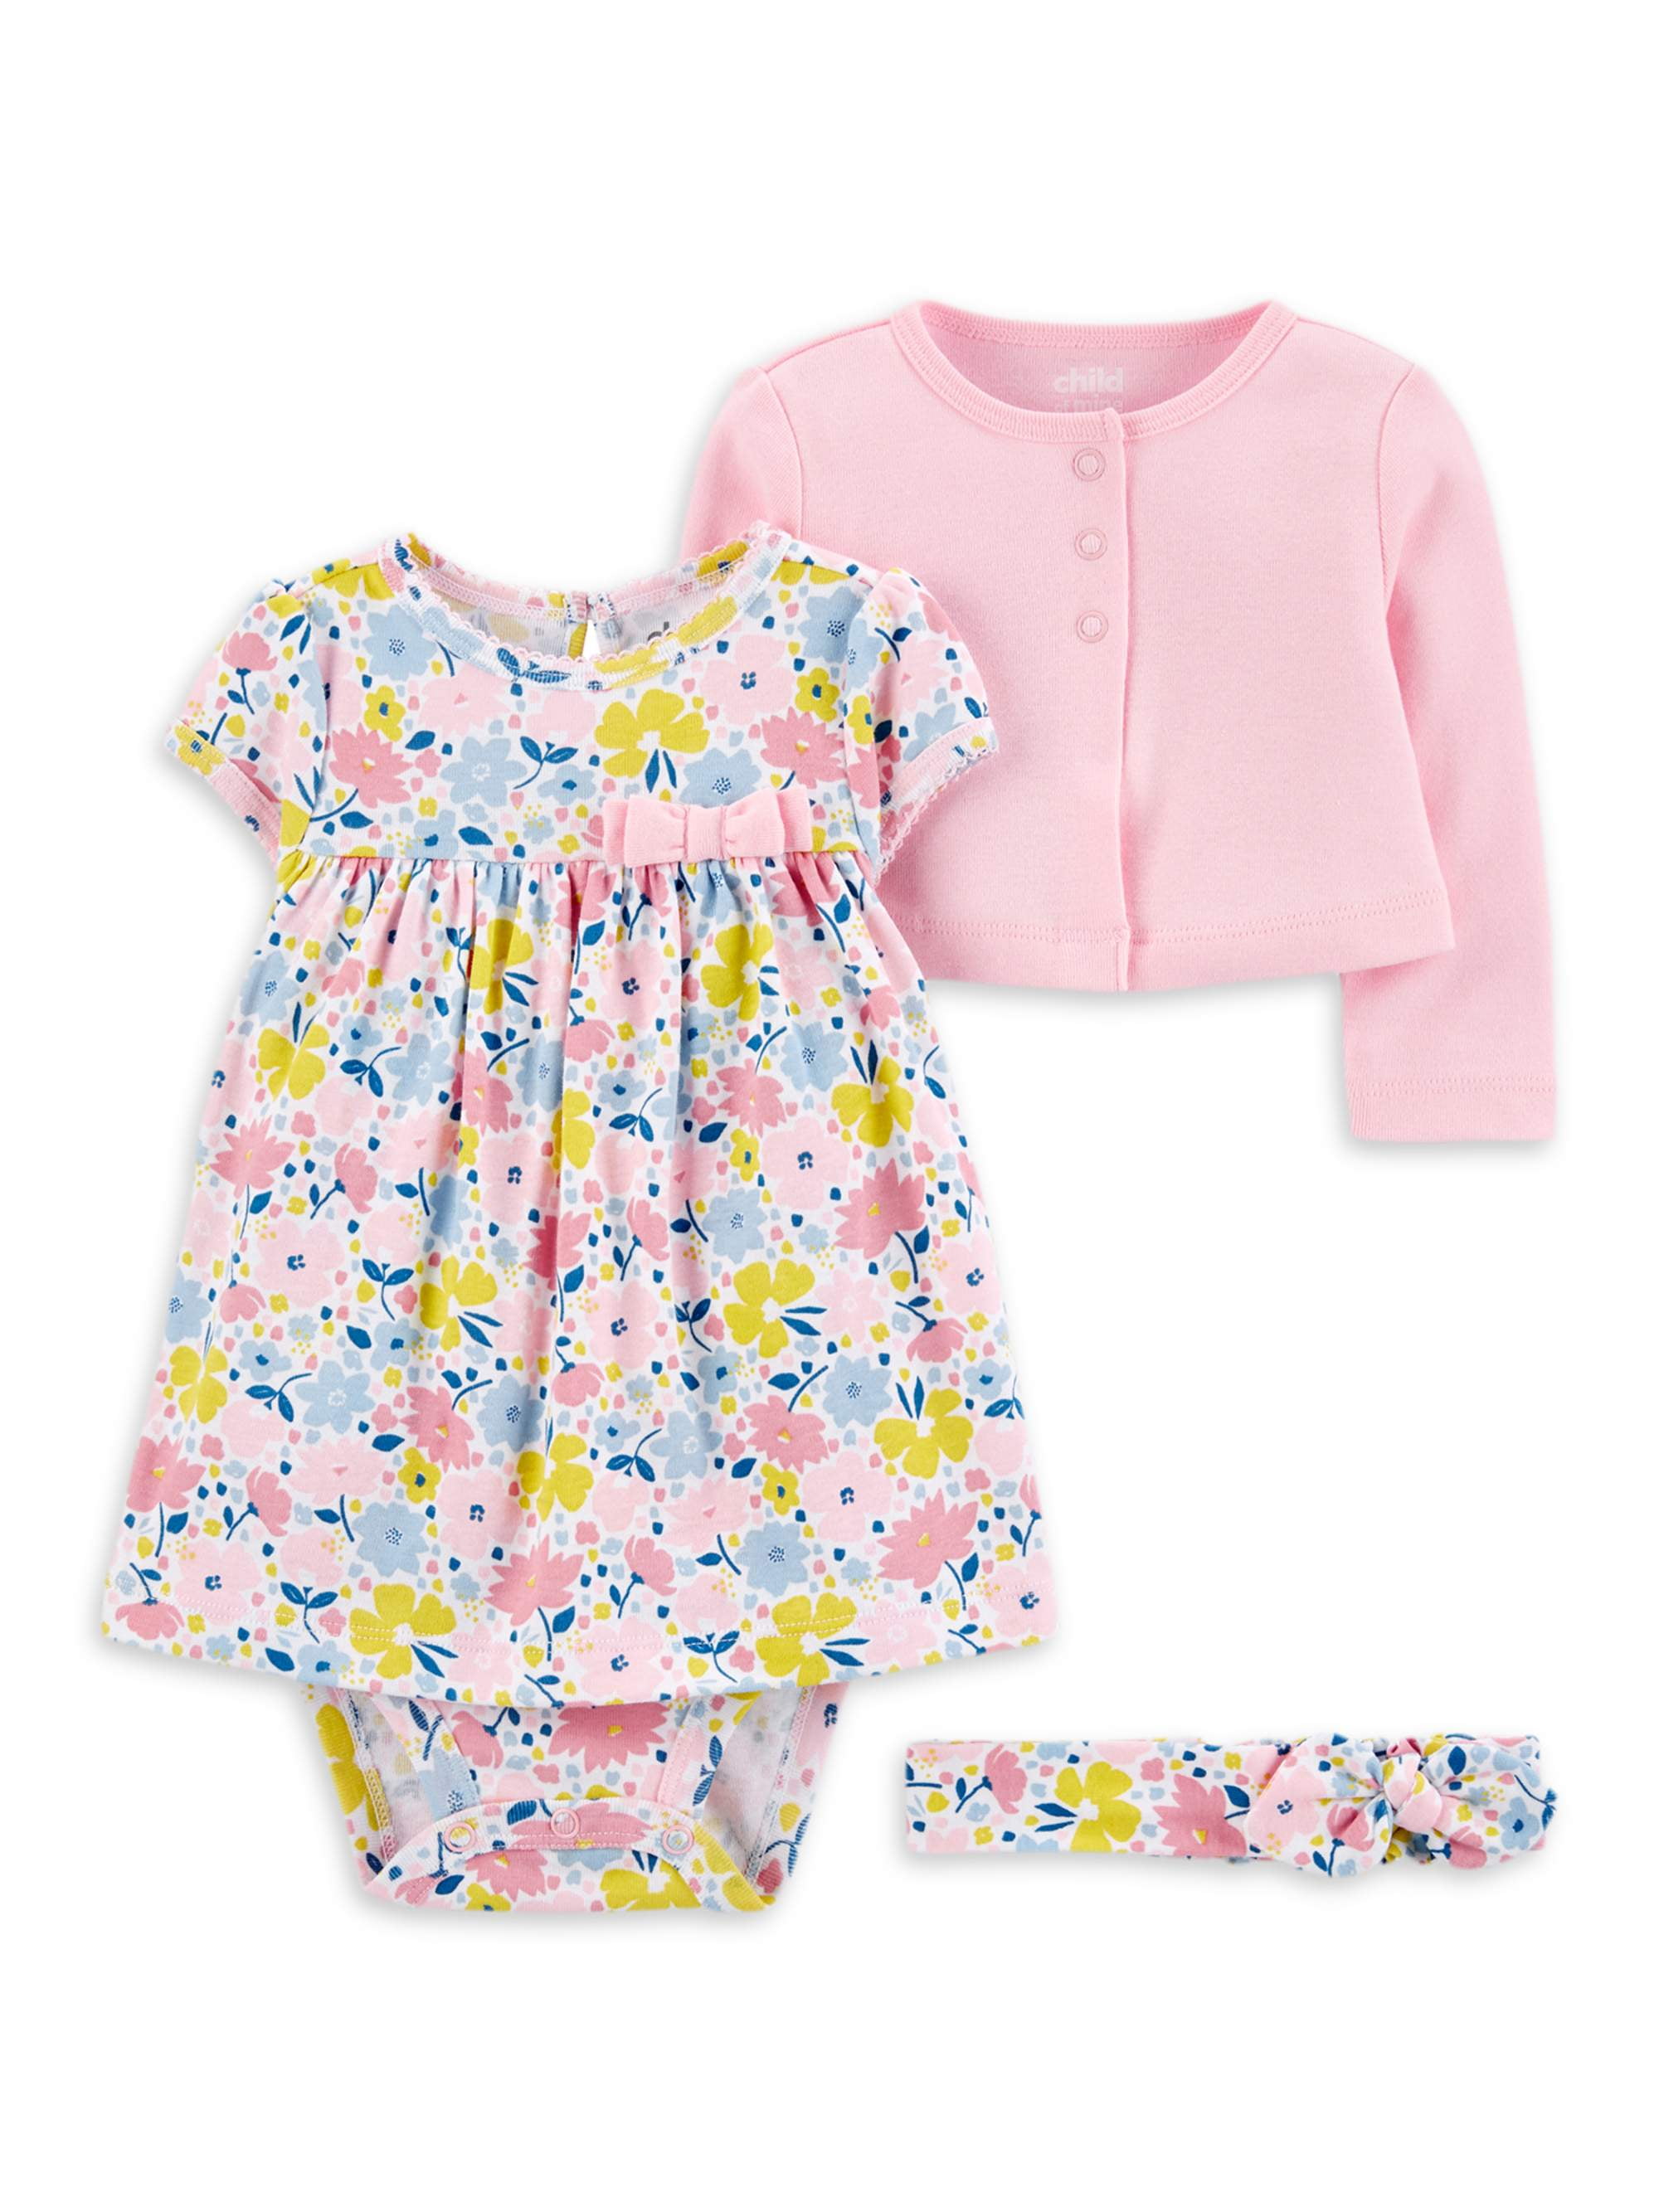 Headband 2 Pieces Outfits Set Infant Toddler Baby Girl Floral Dresses Long Sleeve Knit Dress Skirt